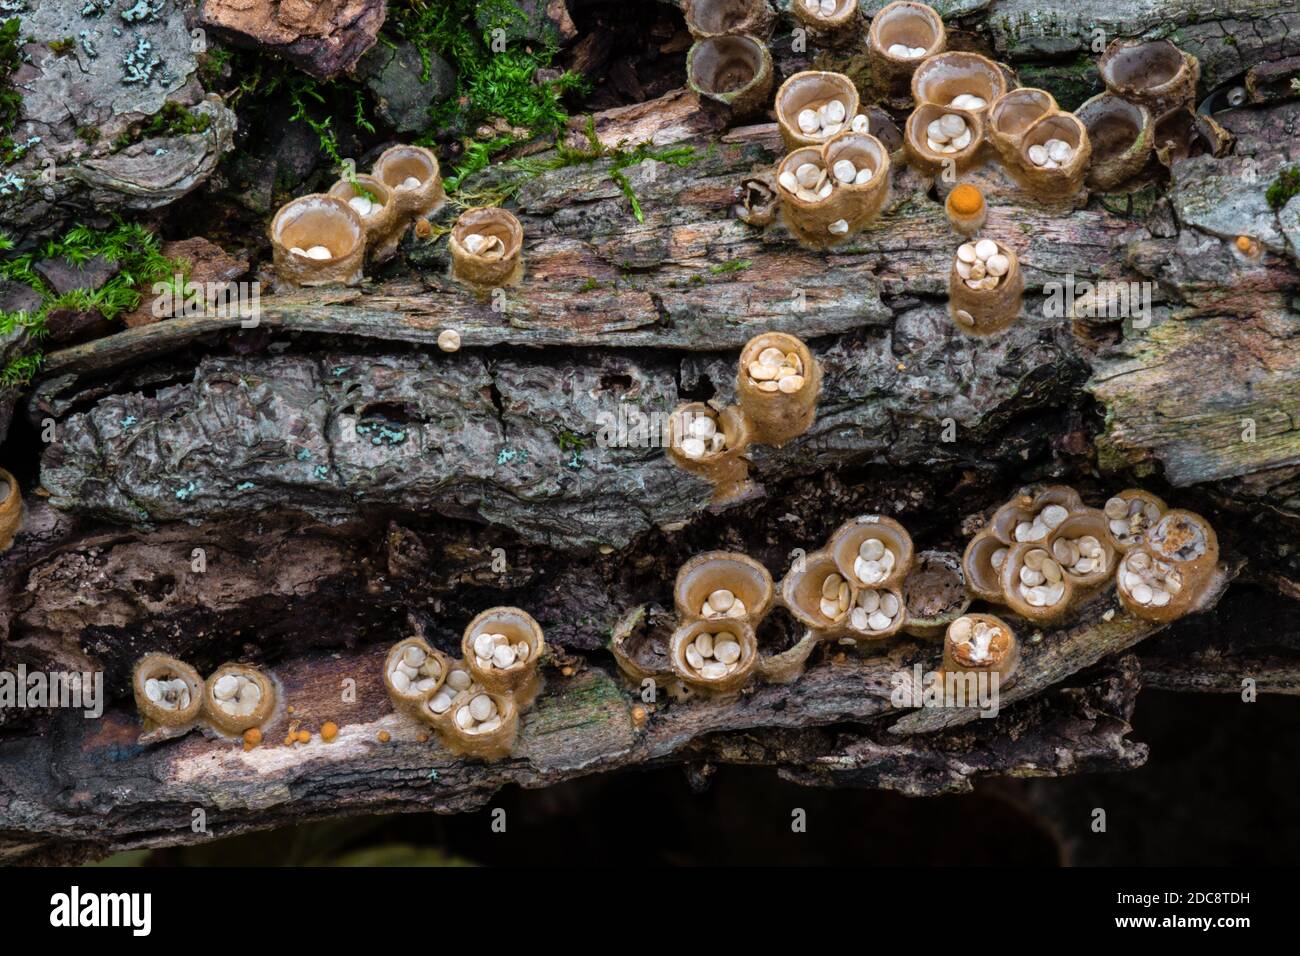 White-egg Bird’s Nest Fungus growing on decaying wood in Pennsylvania’s Pocono Mountains. Each “nest” averages 5 to 10mm across and up to 10mm high. Stock Photo